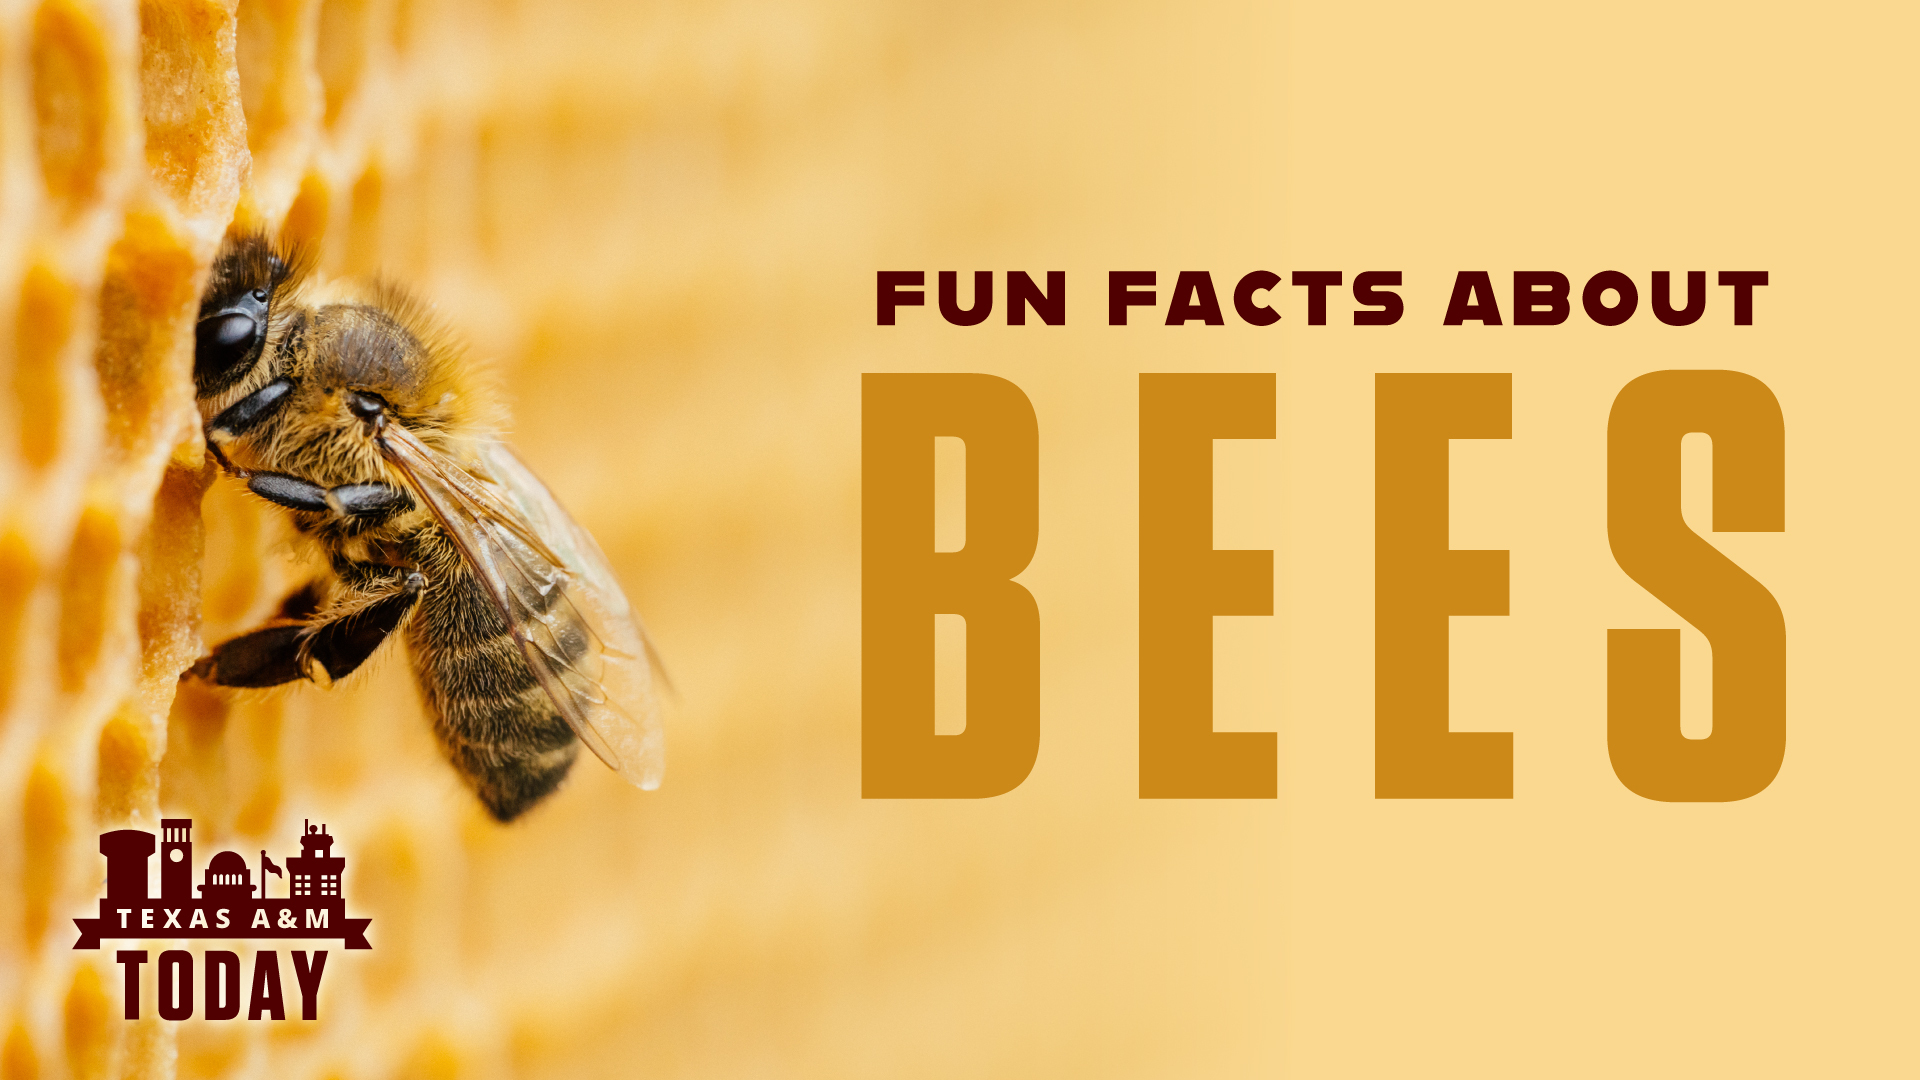 Fun Facts About Bees